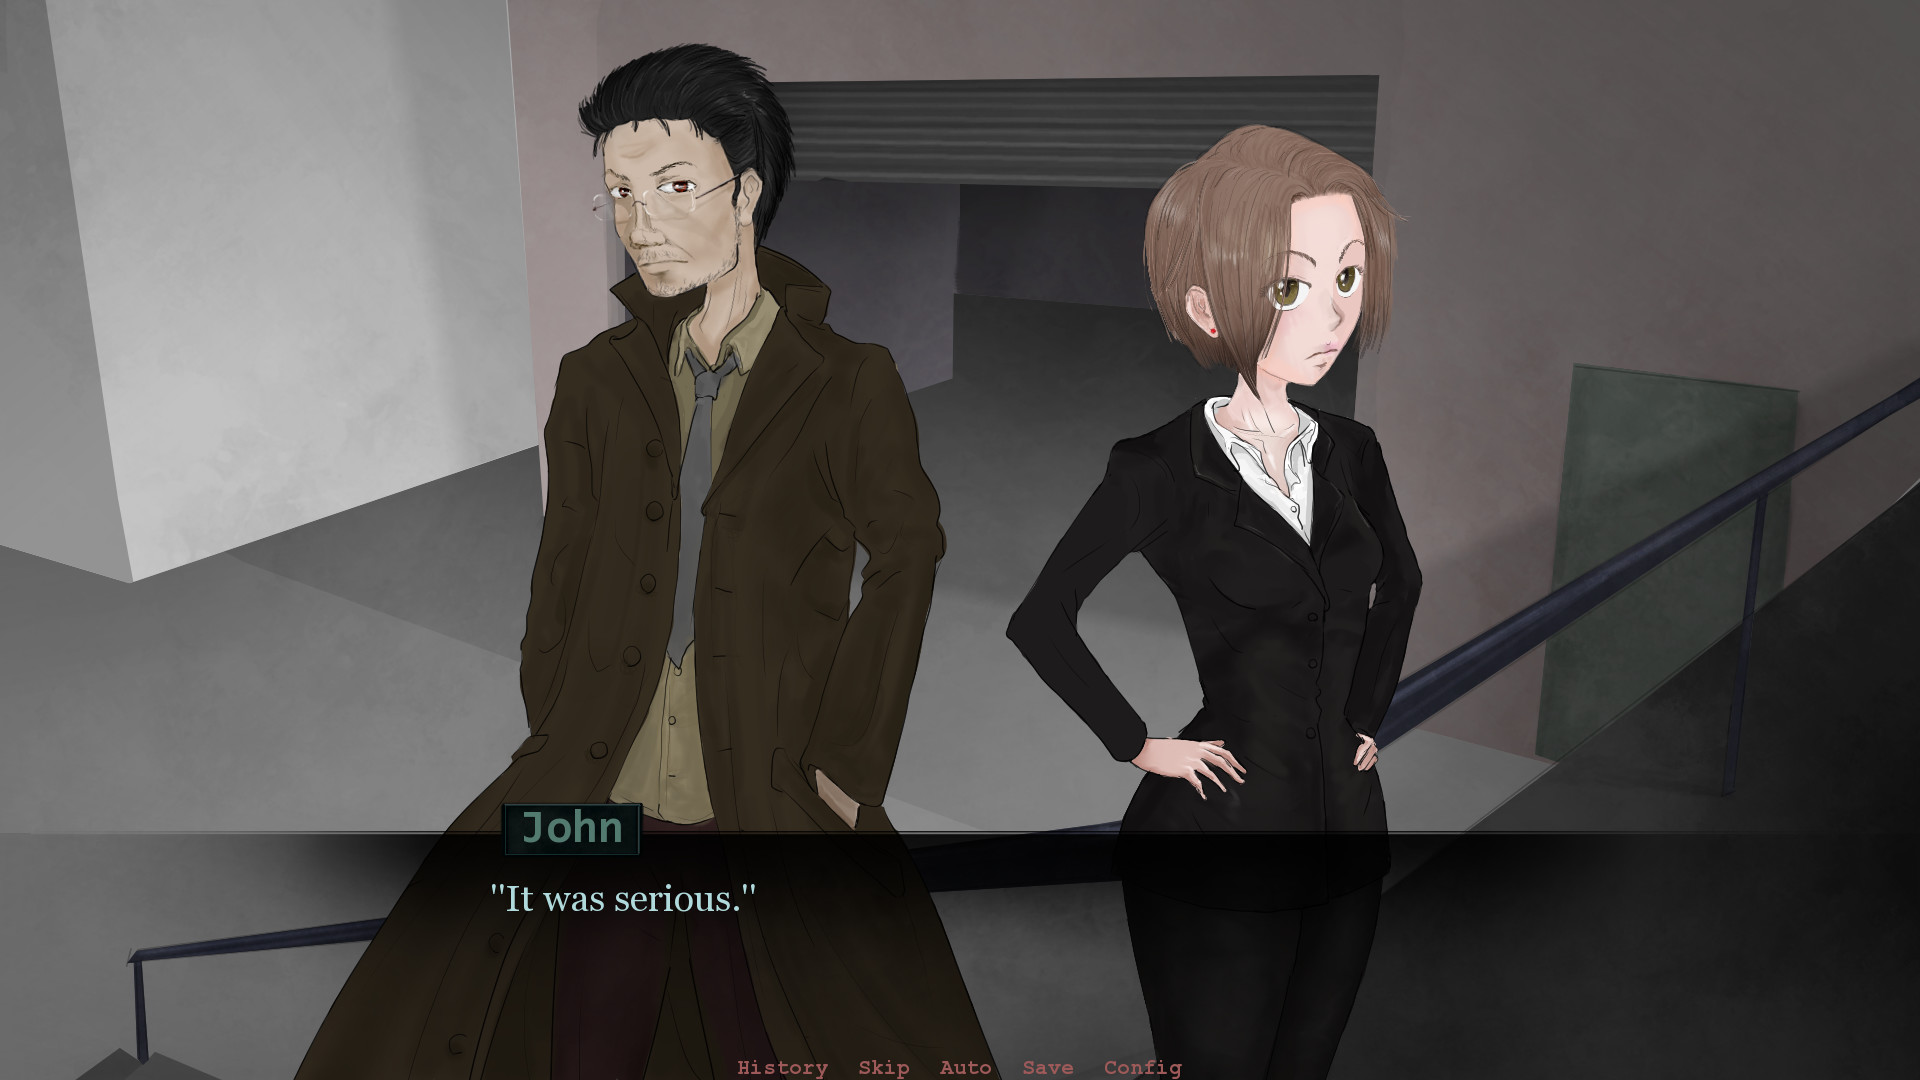 Traumatic Syndrome - Investigative Horror Visual Novel Free Download